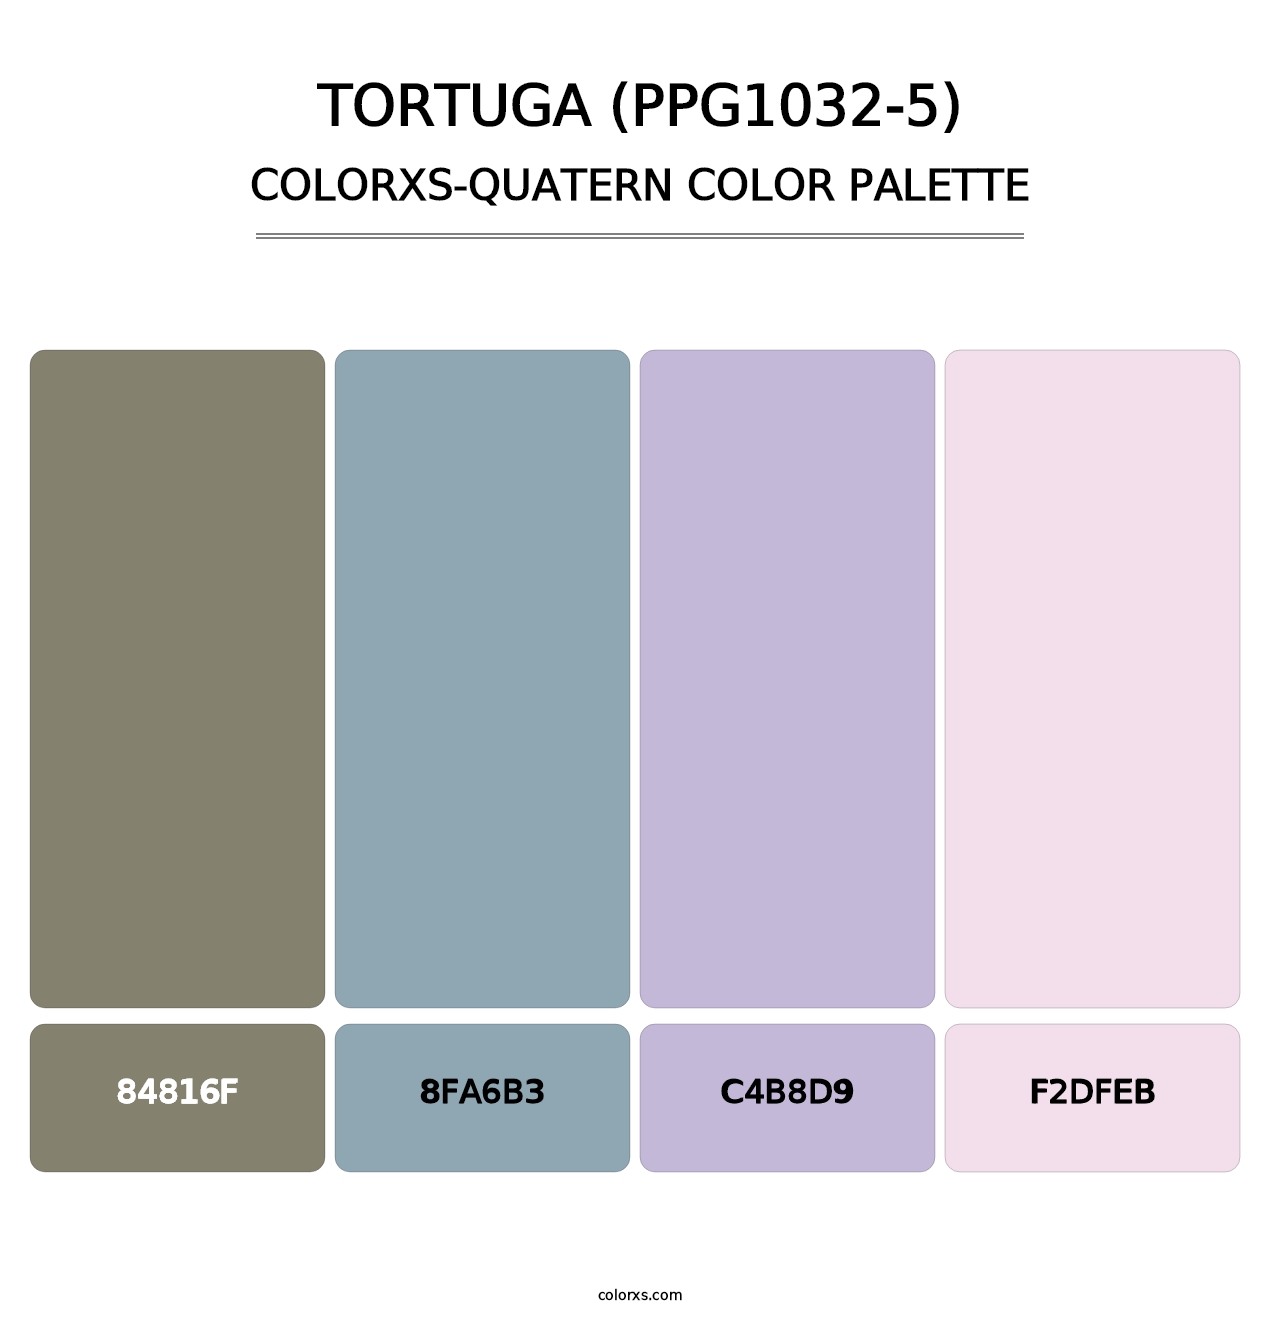 Tortuga (PPG1032-5) - Colorxs Quatern Palette